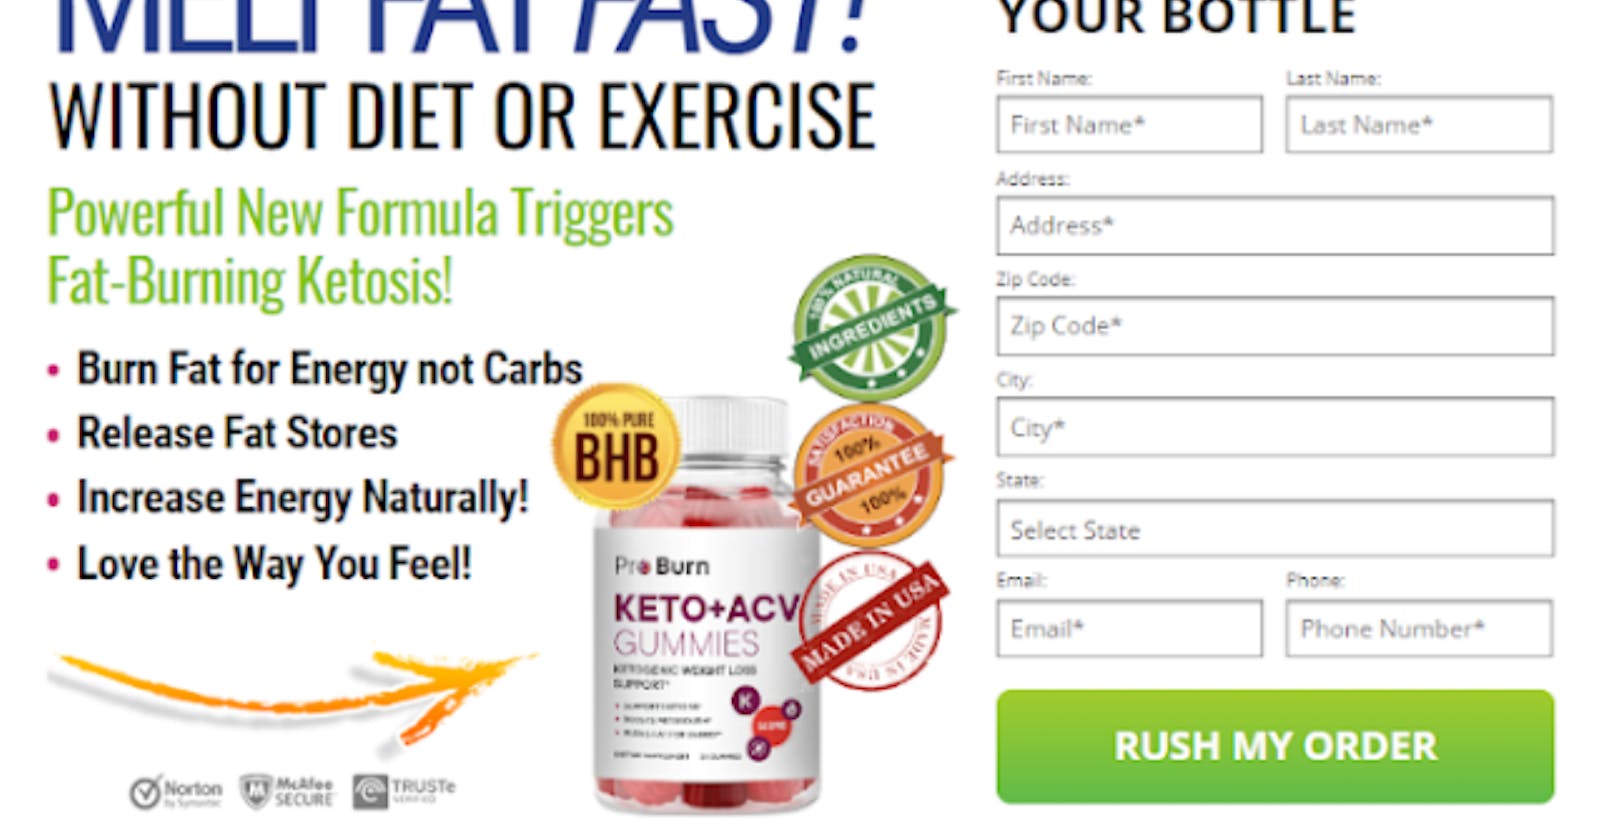 Pro Burn Keto ACV Gummies USA Reviews For Weight Loss Official Website?